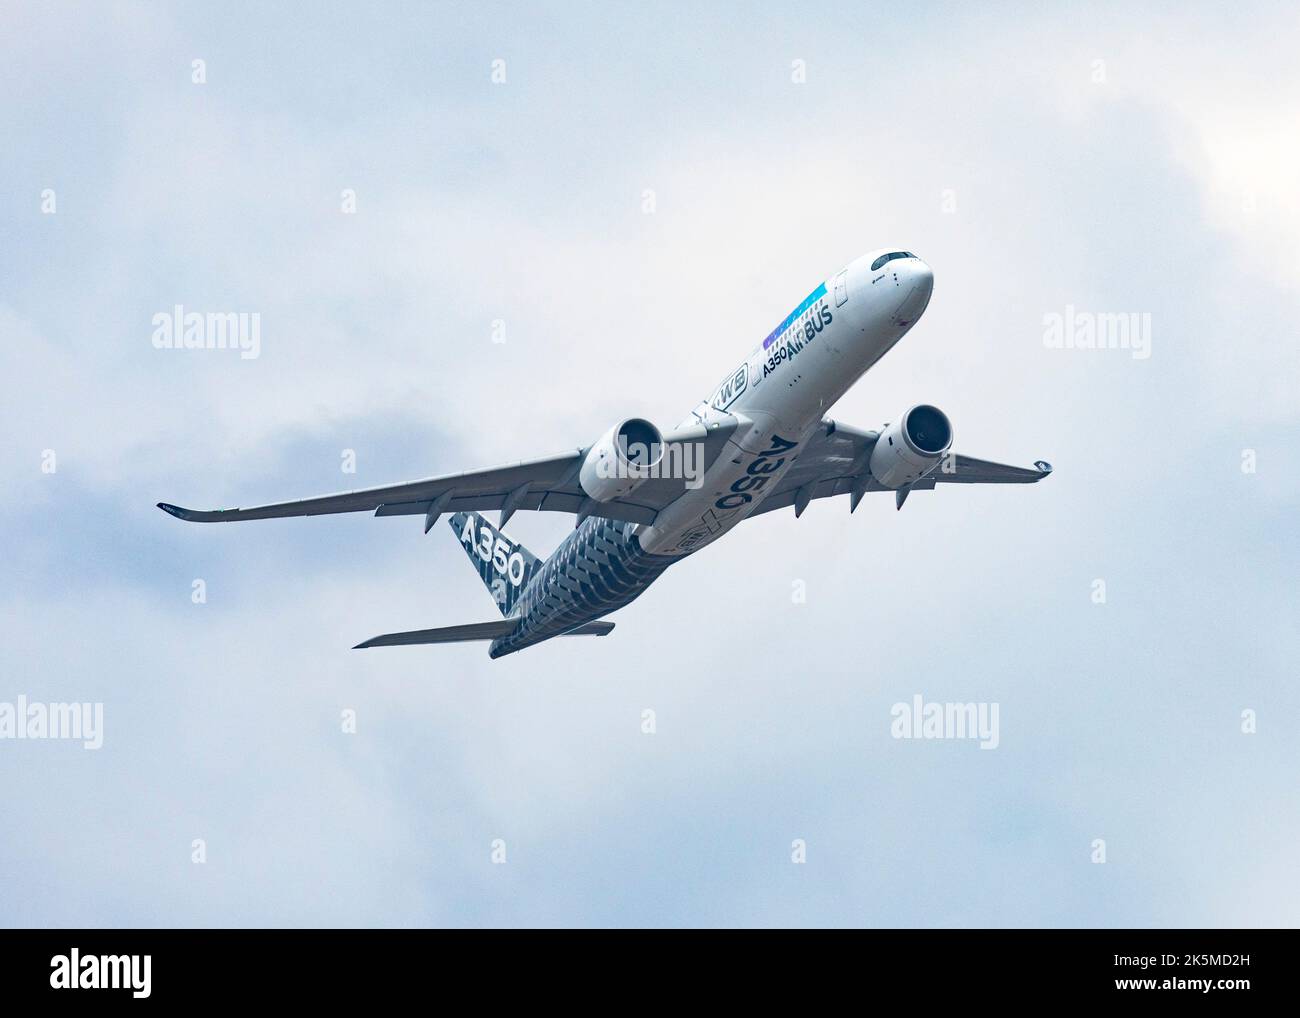 The Airbus A350 commercial airliner flying at the 2022 Farnborough International Air Show Stock Photo